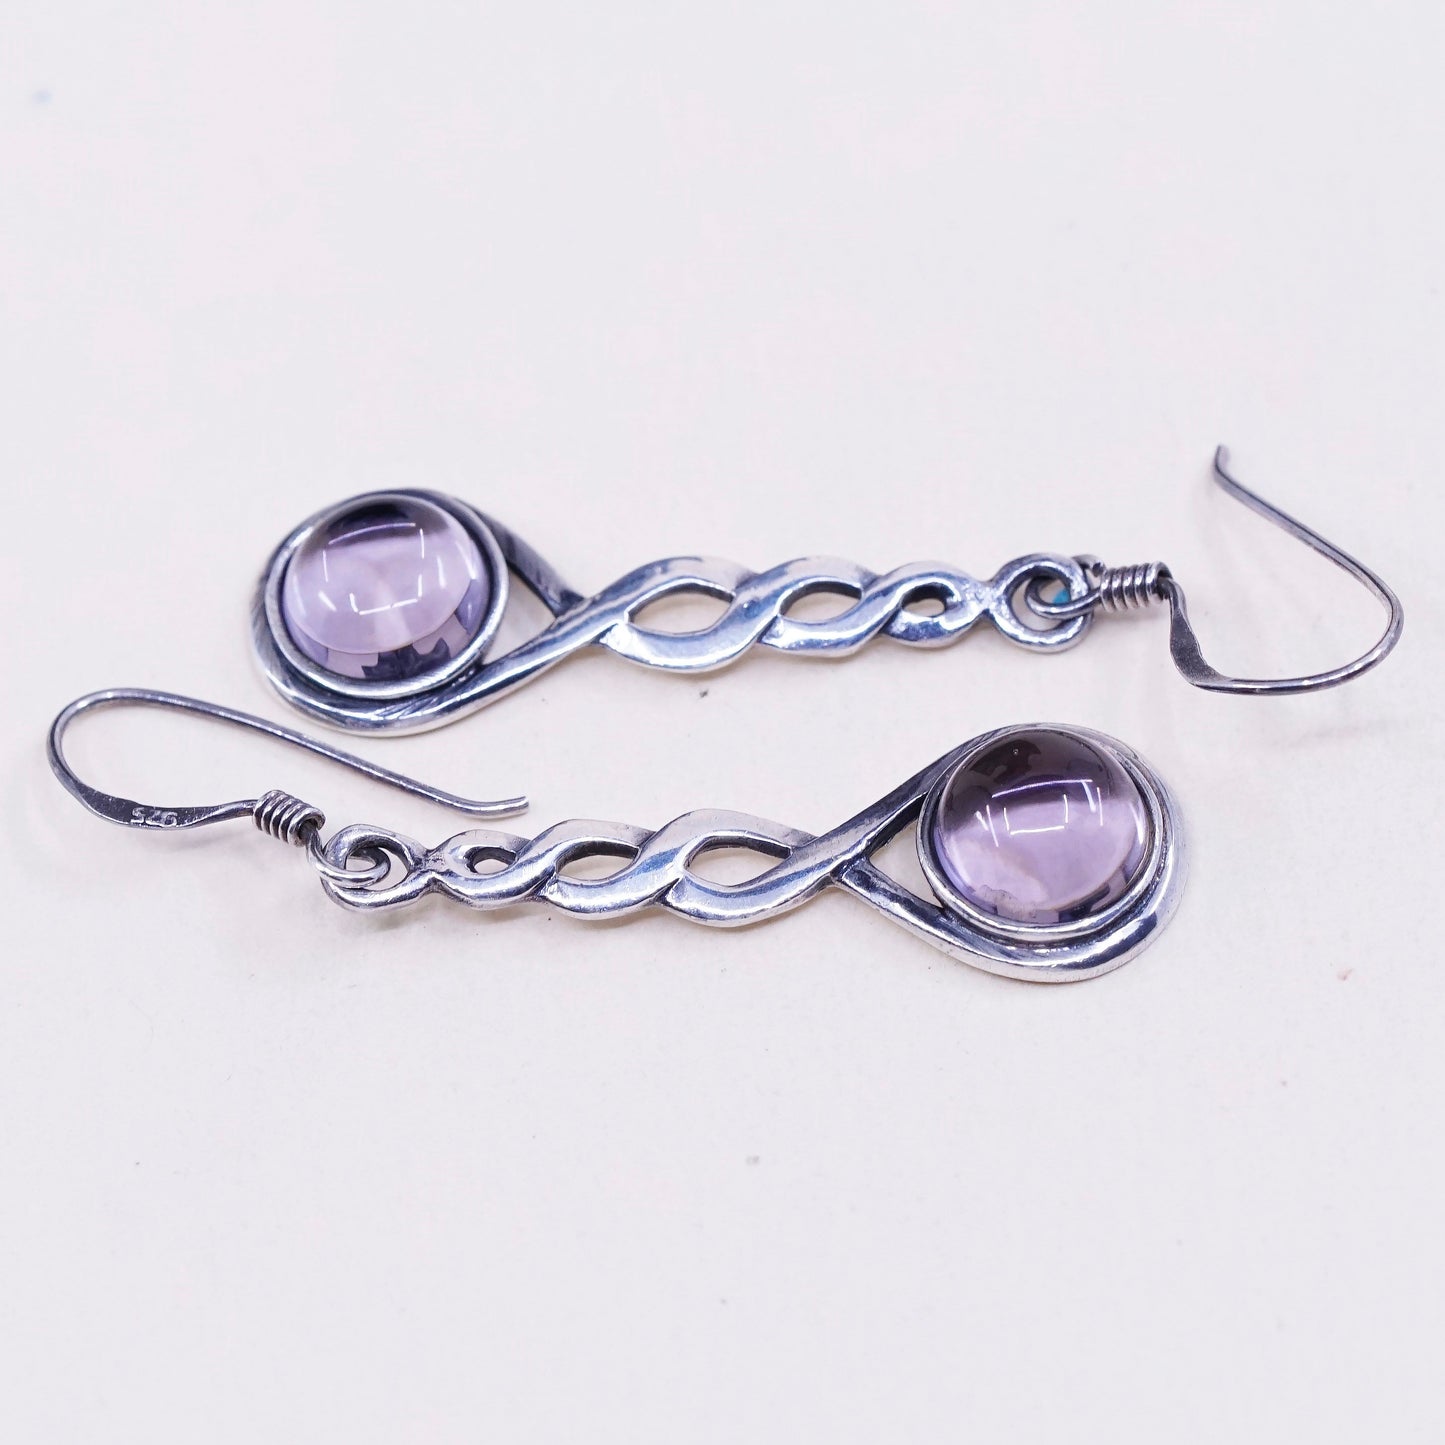 Vintage sterling silver handmade earrings, 925 twisted drops with amethyst